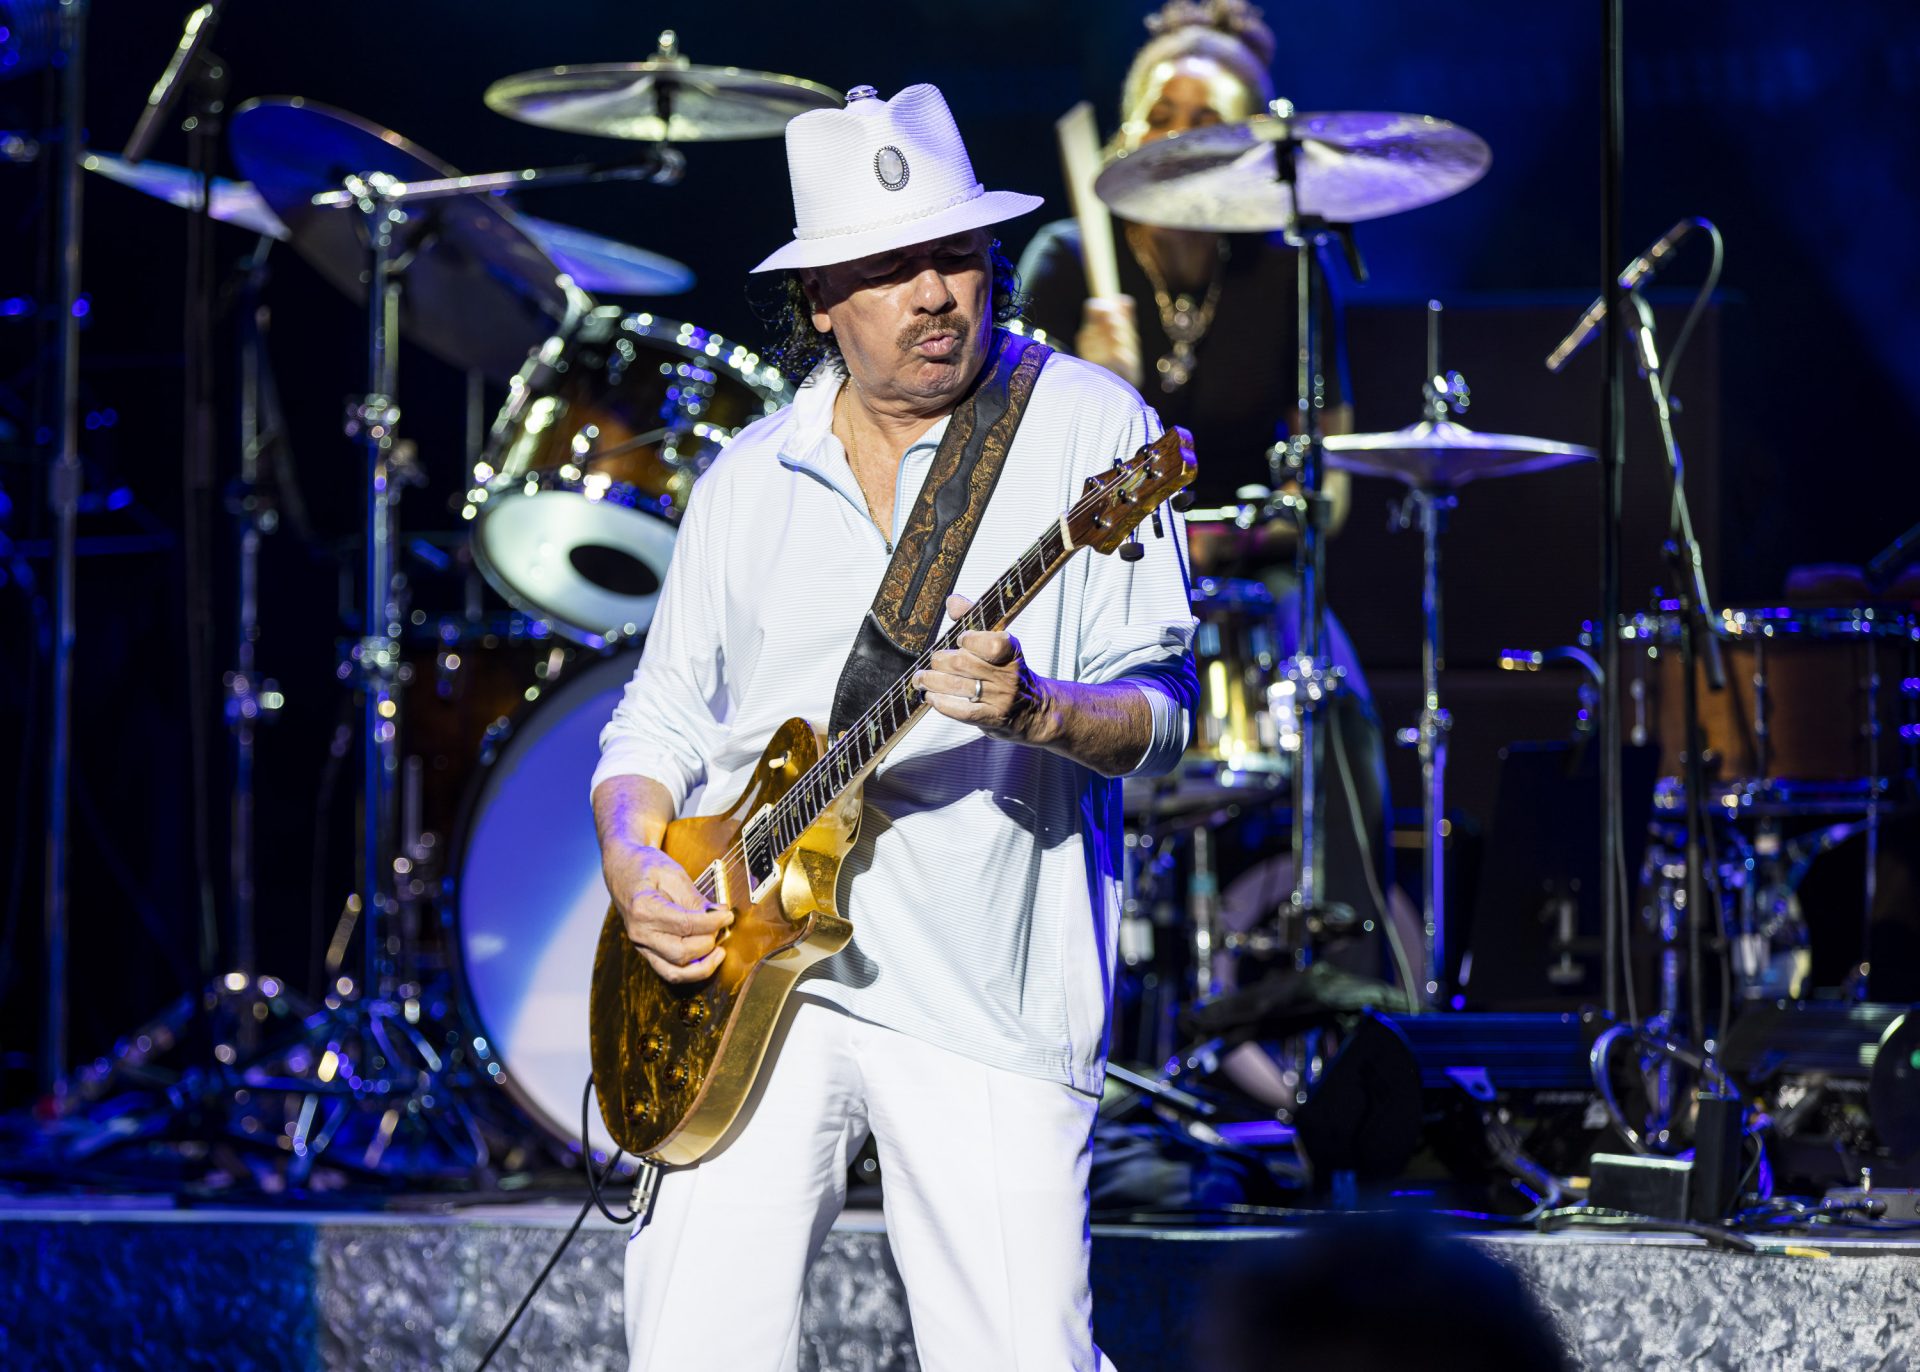 Legendary Guitarist Carlos Santana Taken To Hospital After Collapsing On Stage Due To Heat Exhaustion & Dehydration